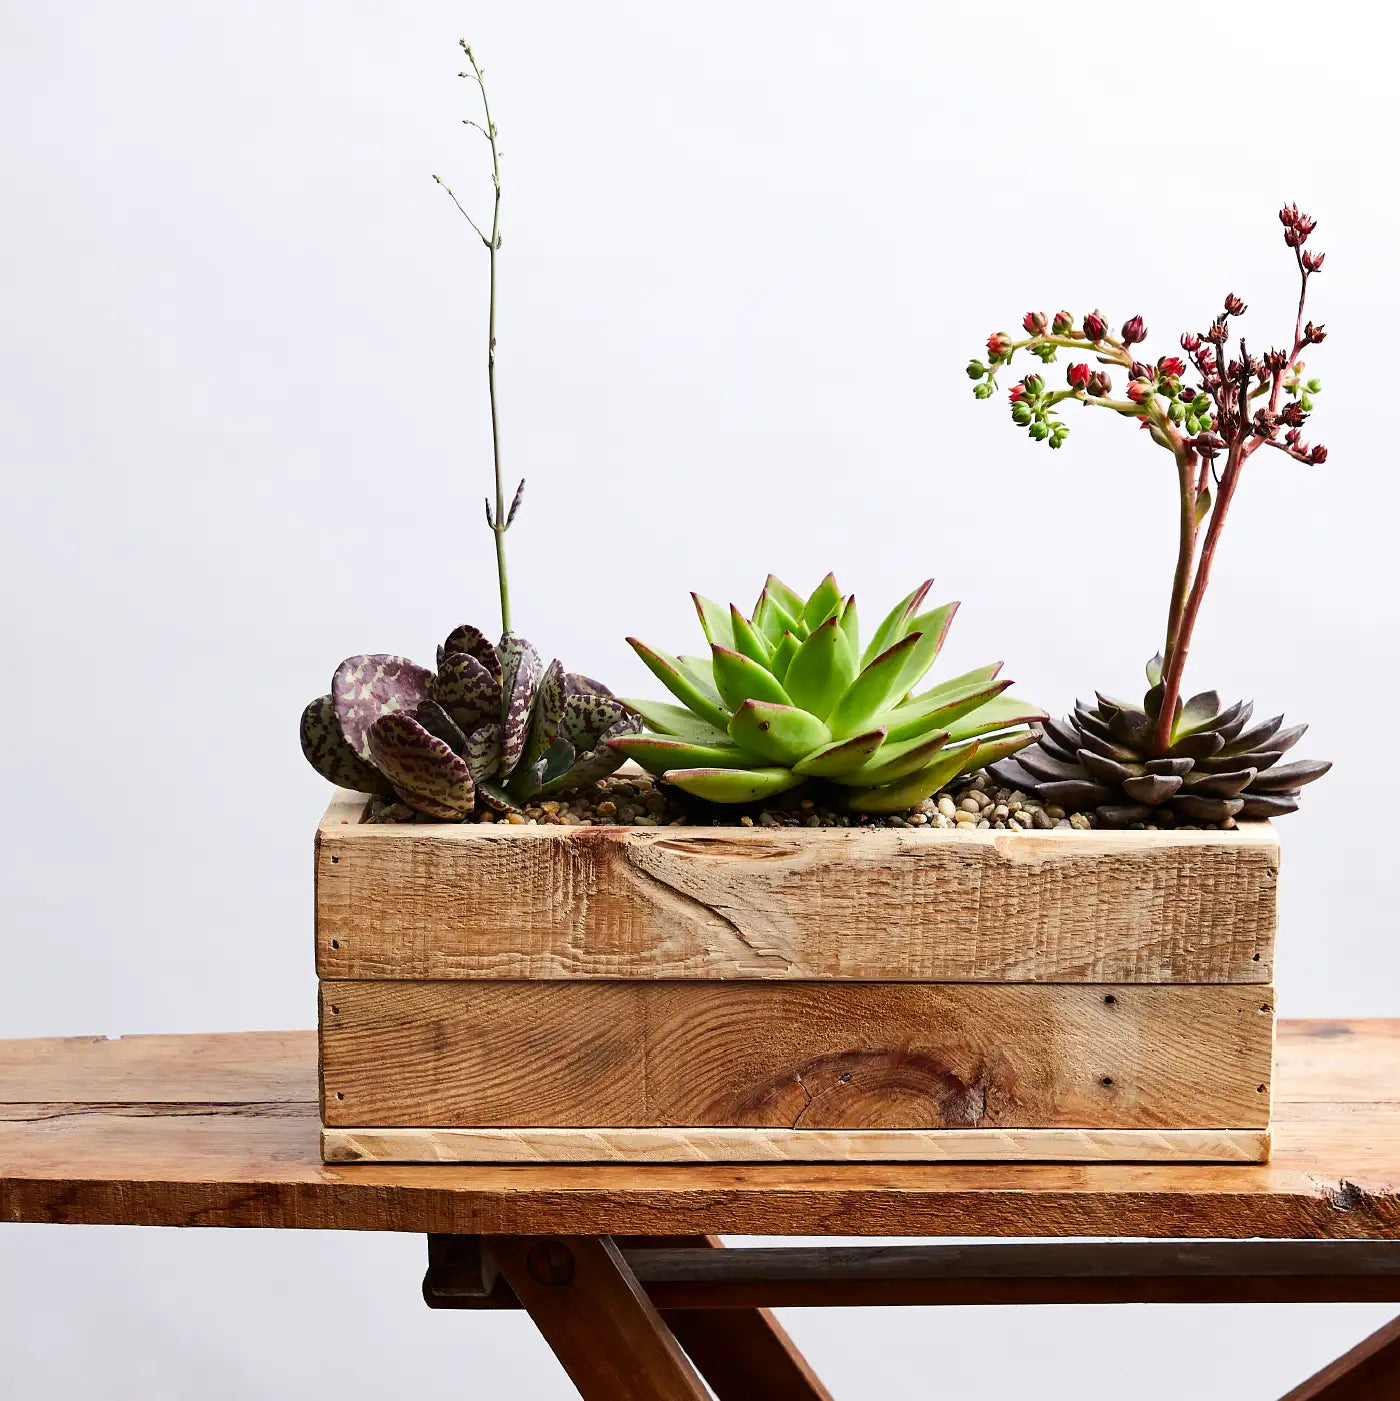 A rustic wooden planter box displaying a variety of succulents, including green echeveria and flowering crassula, set on a wooden table. Business Gifting. Fabulous Flowers and Gifts.